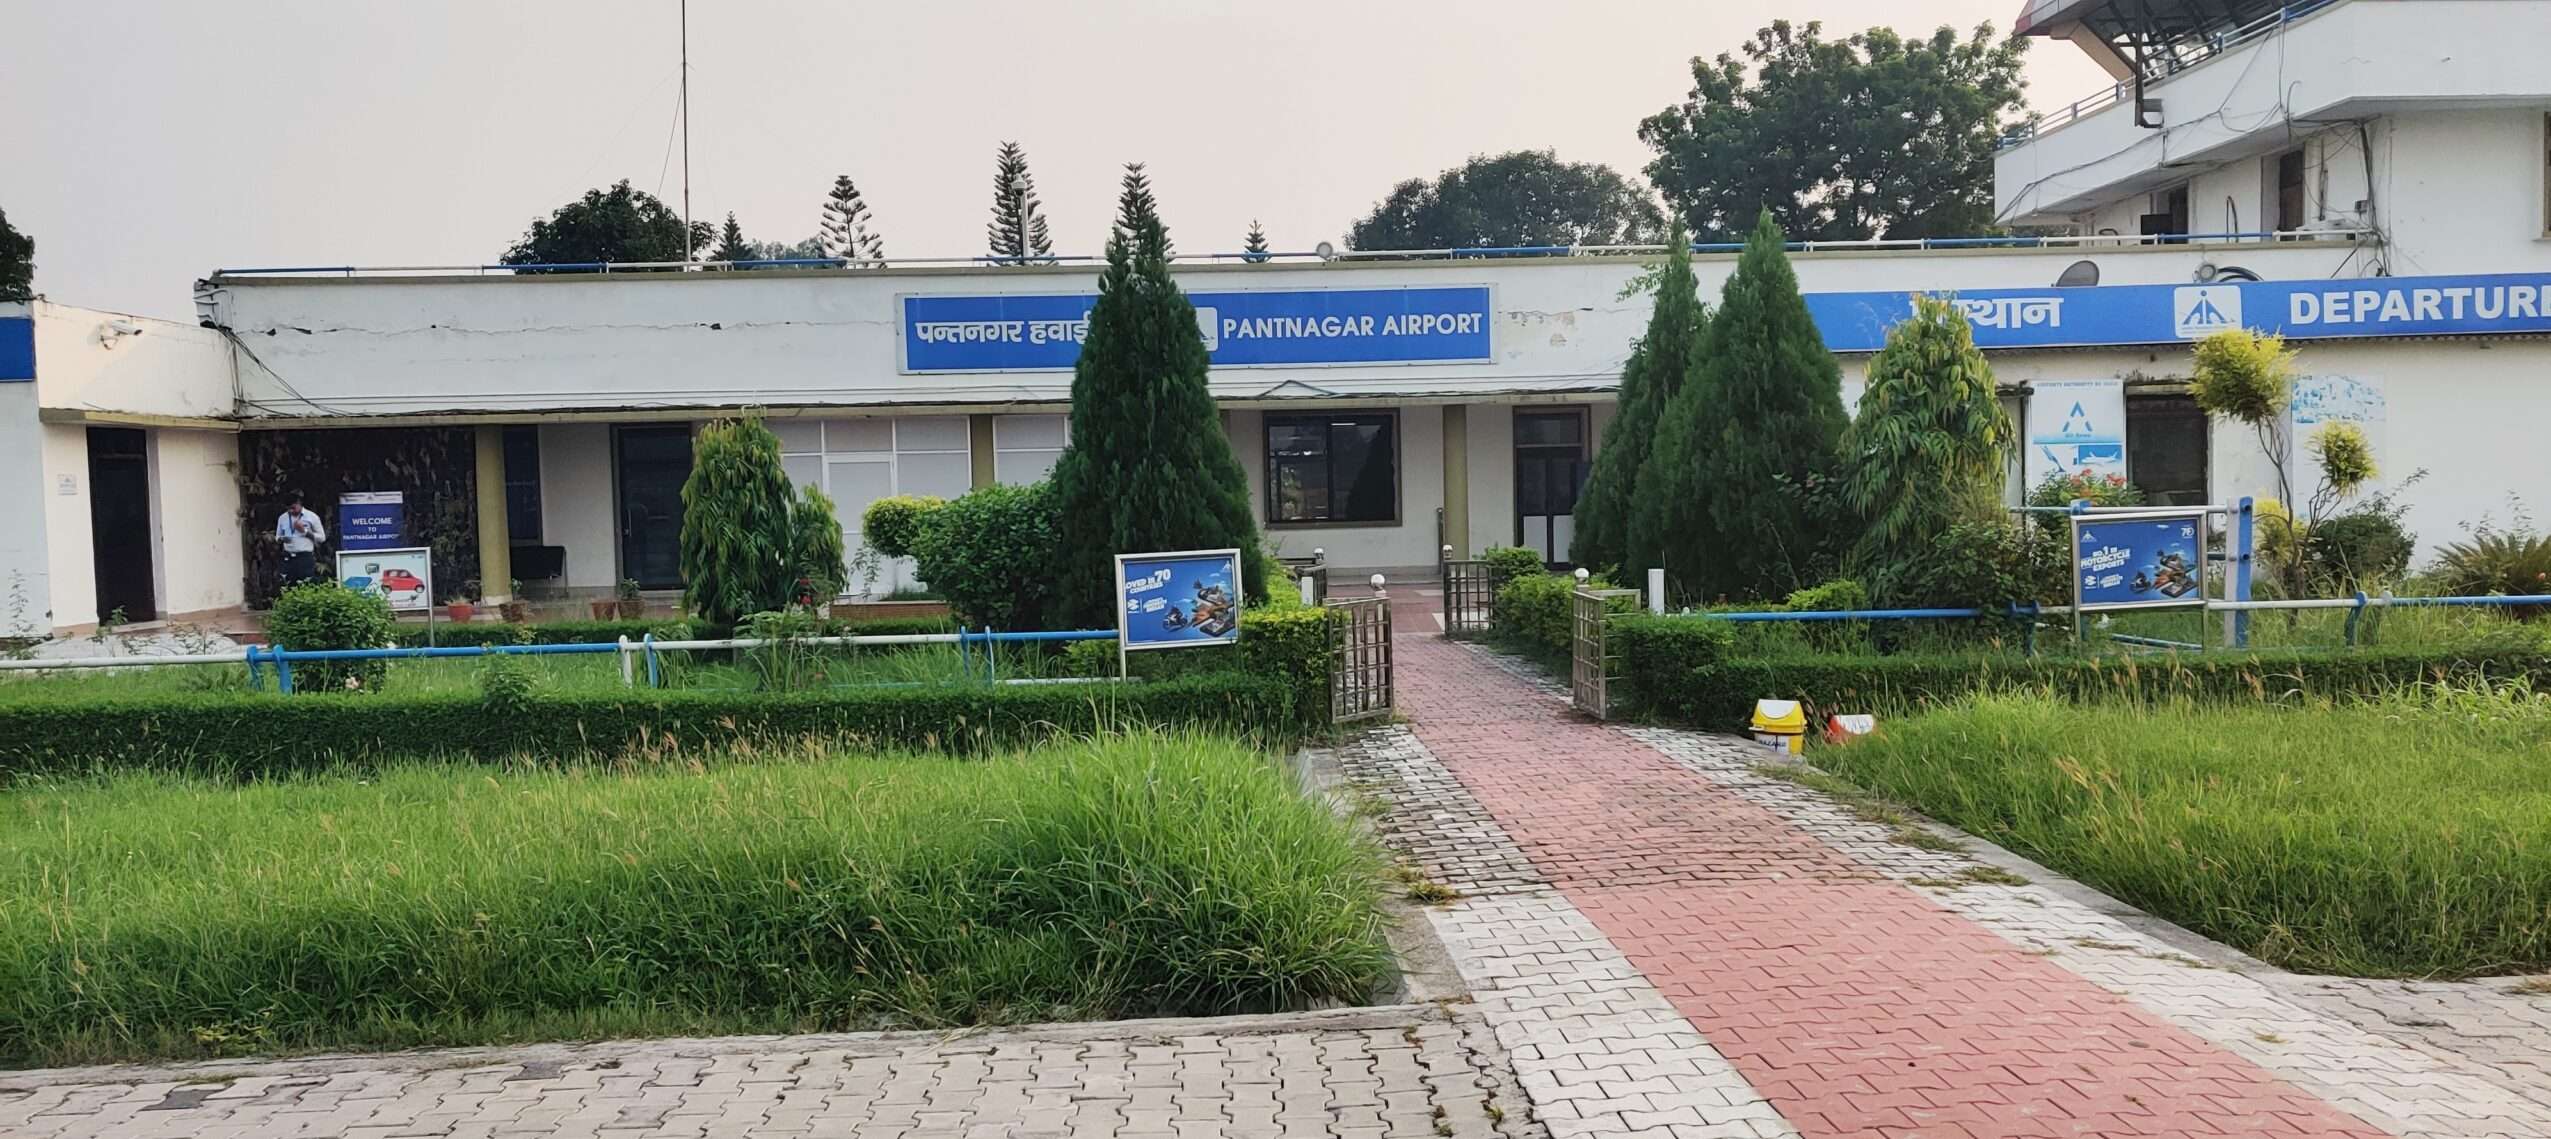 Pantnagar Airport is the closest airport